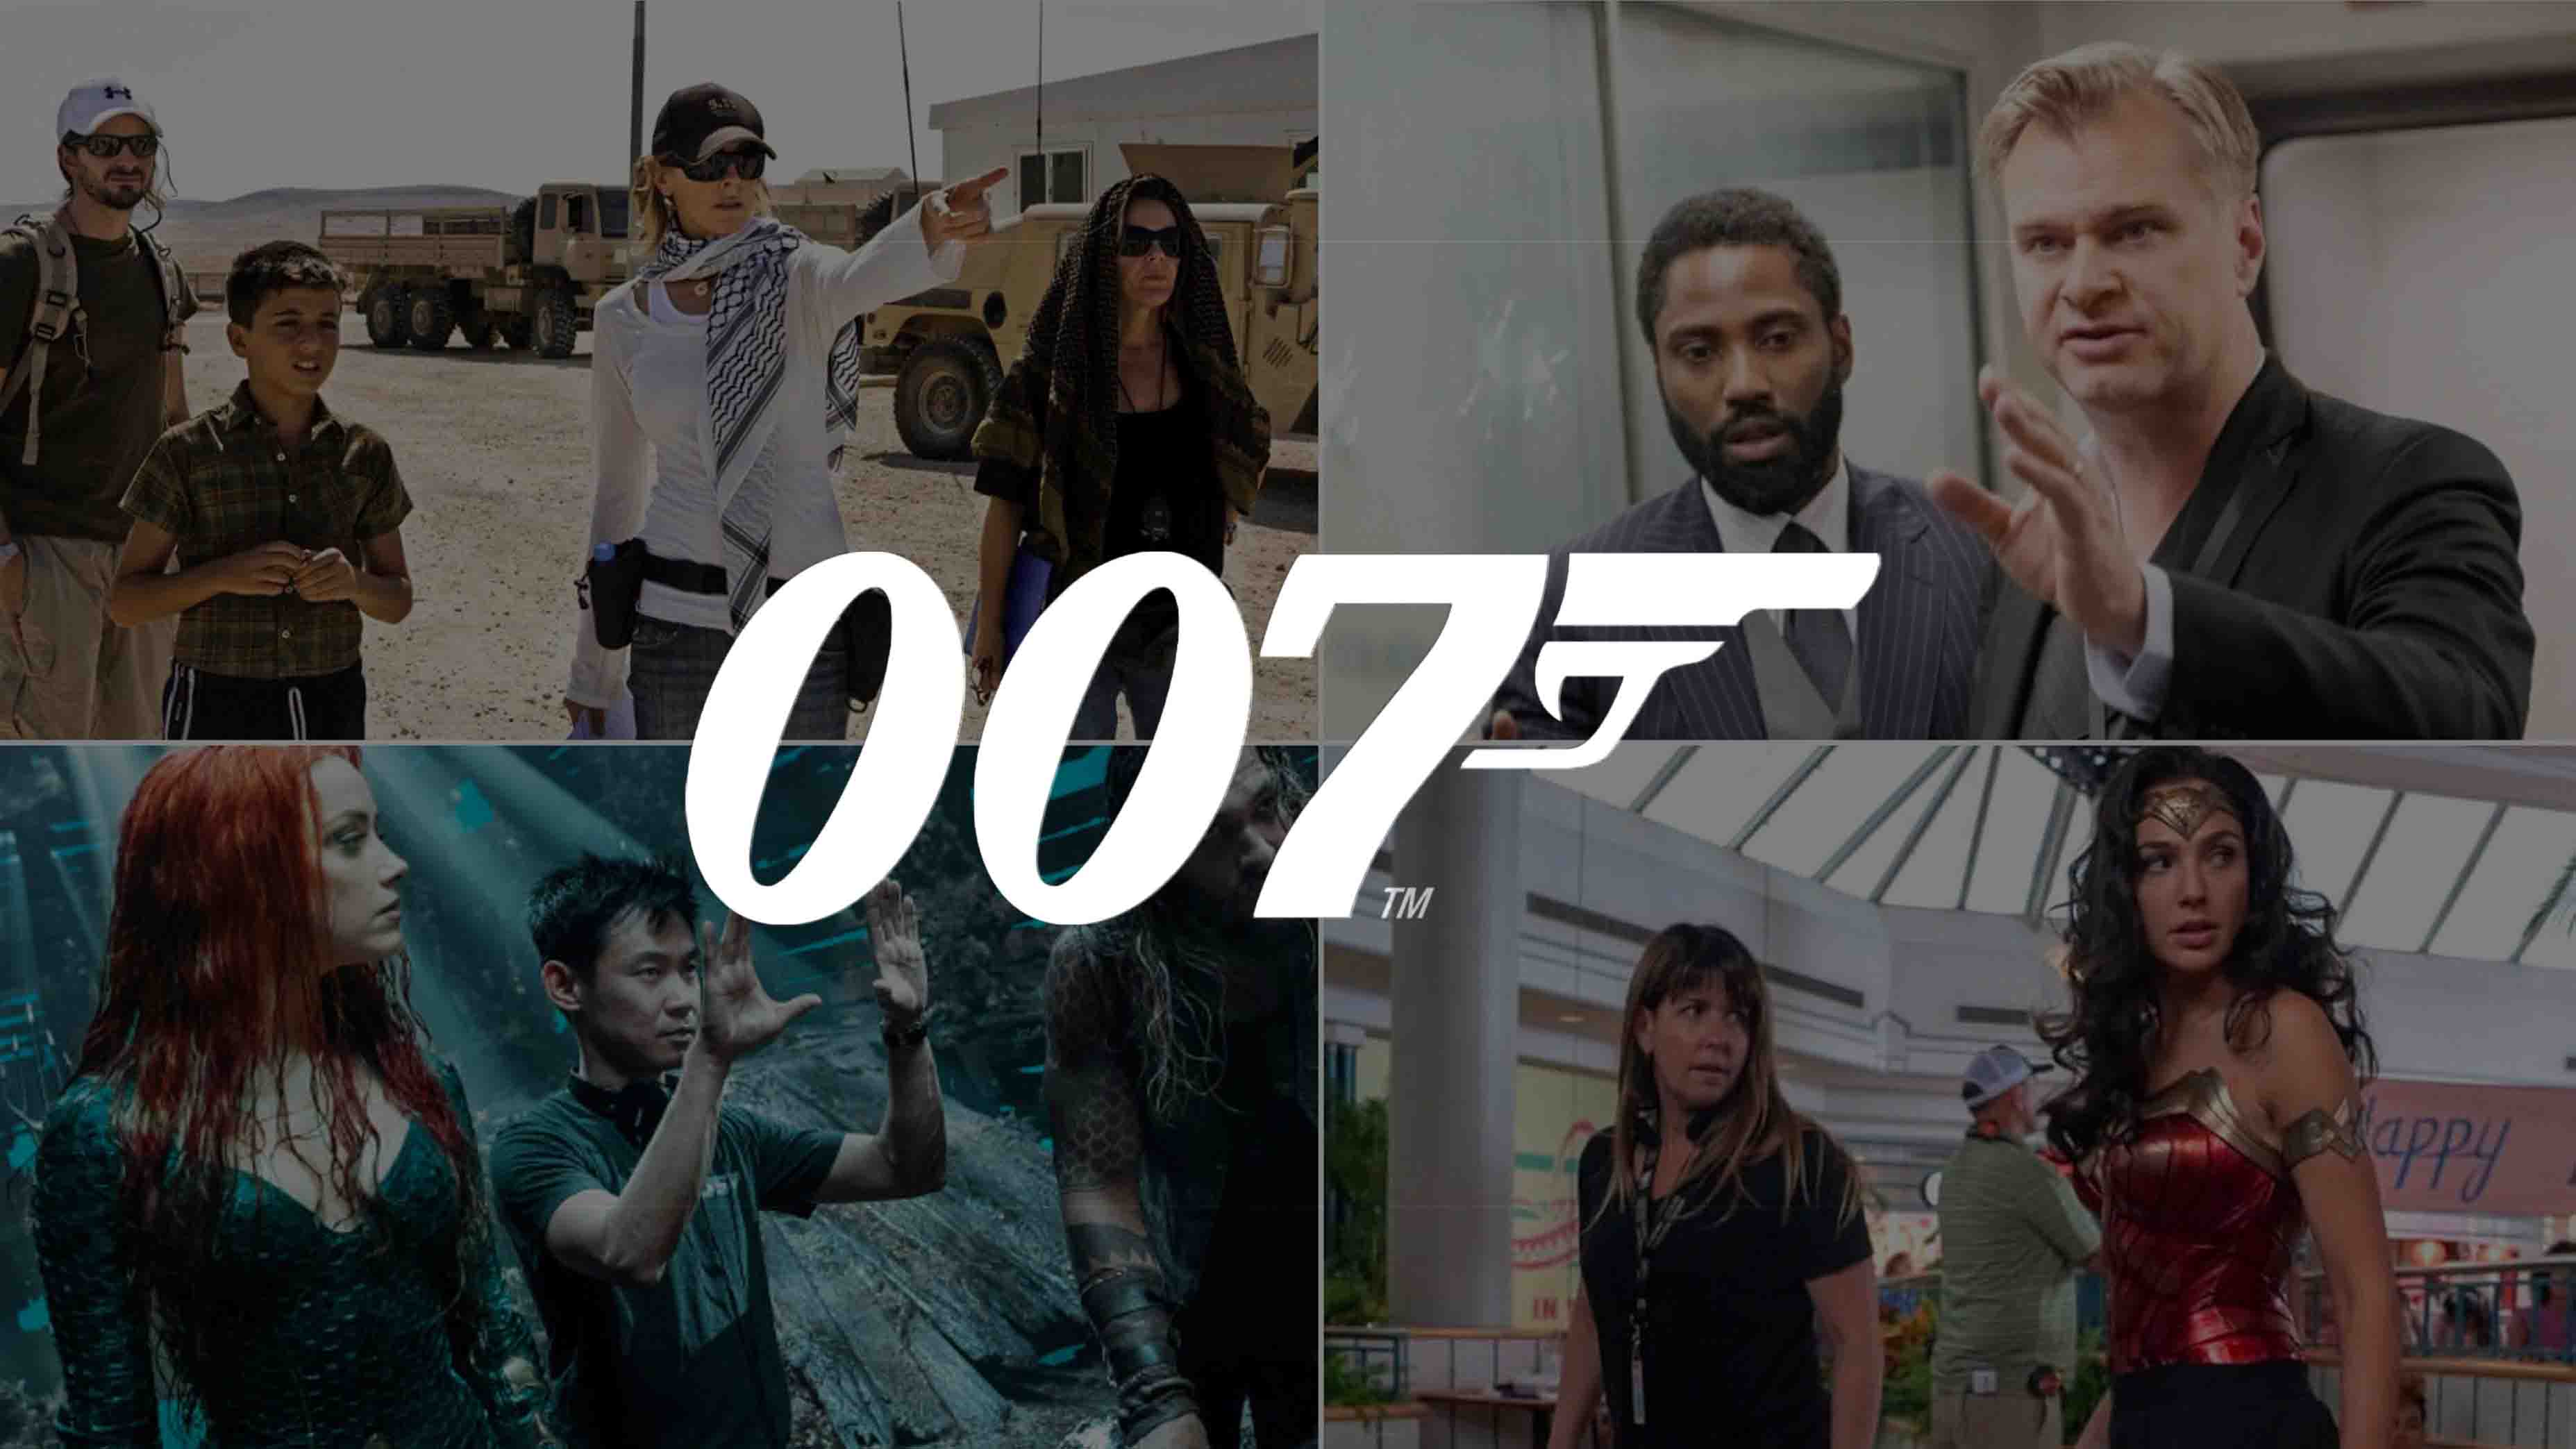 James Bond: Top 10 directors who could helm the next 007 movie